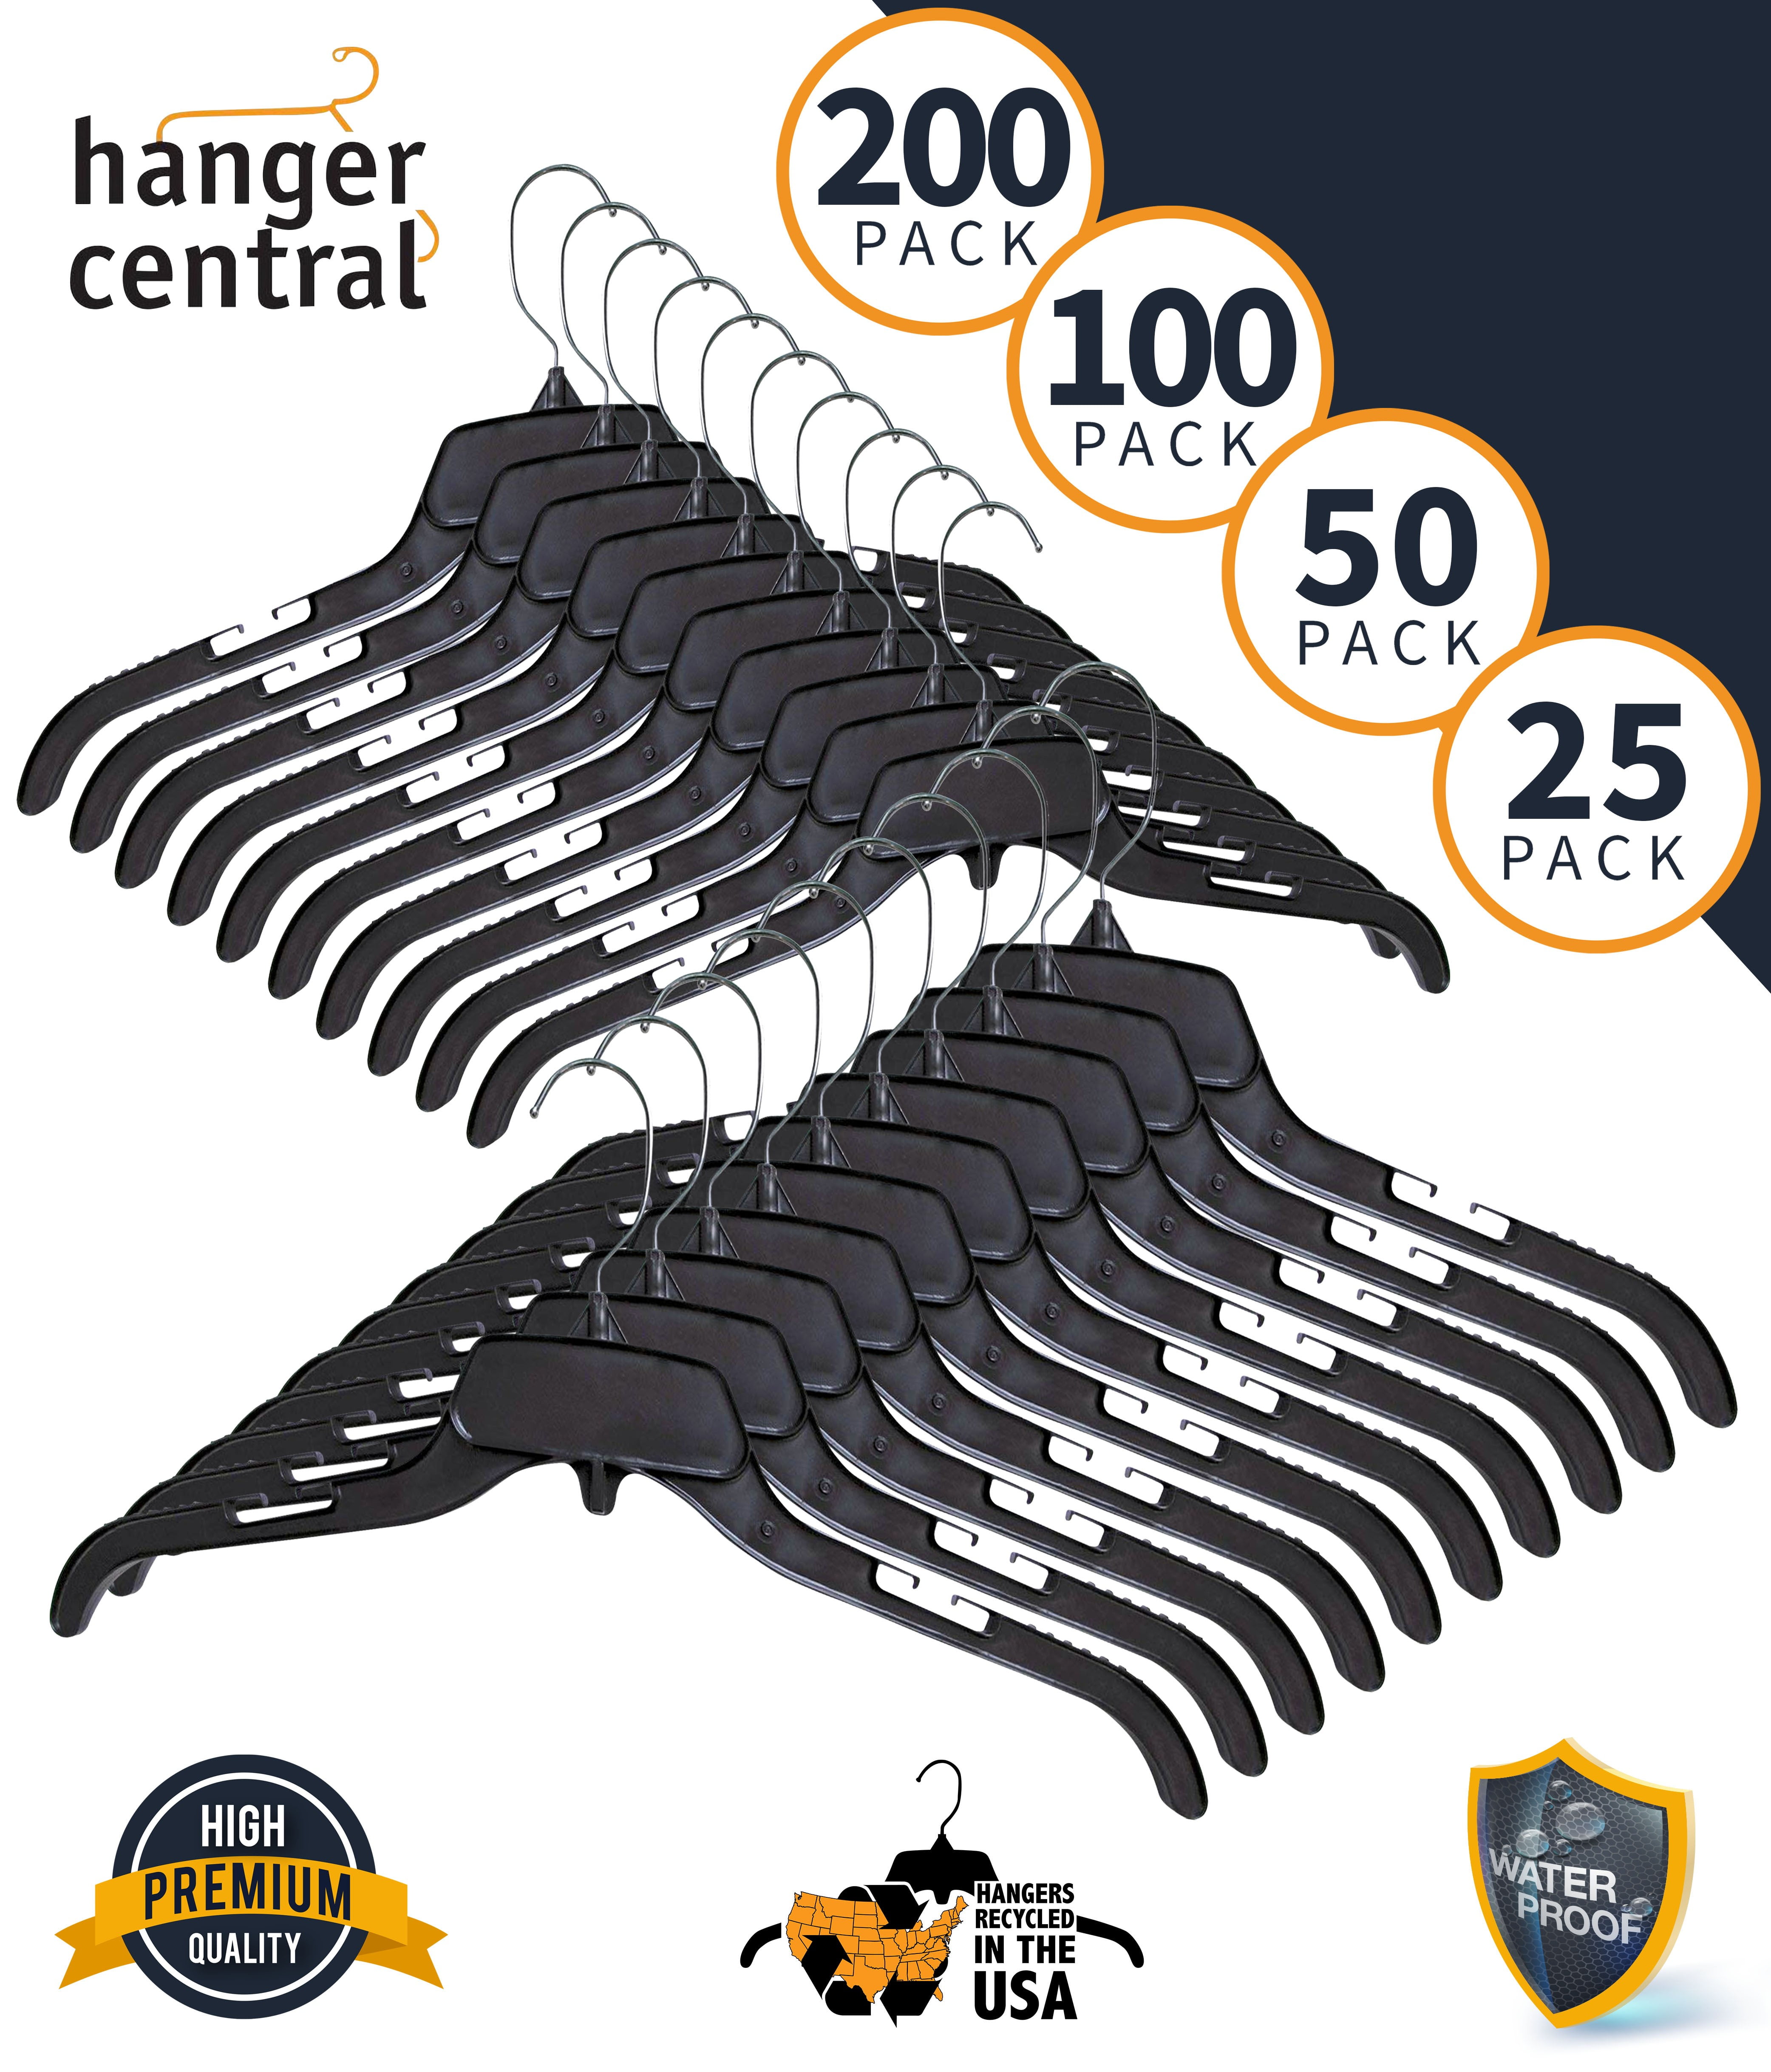 60pk Made in USA Strong Plastic Clothes Hangers Bulk, 20 30 50 100 Pack